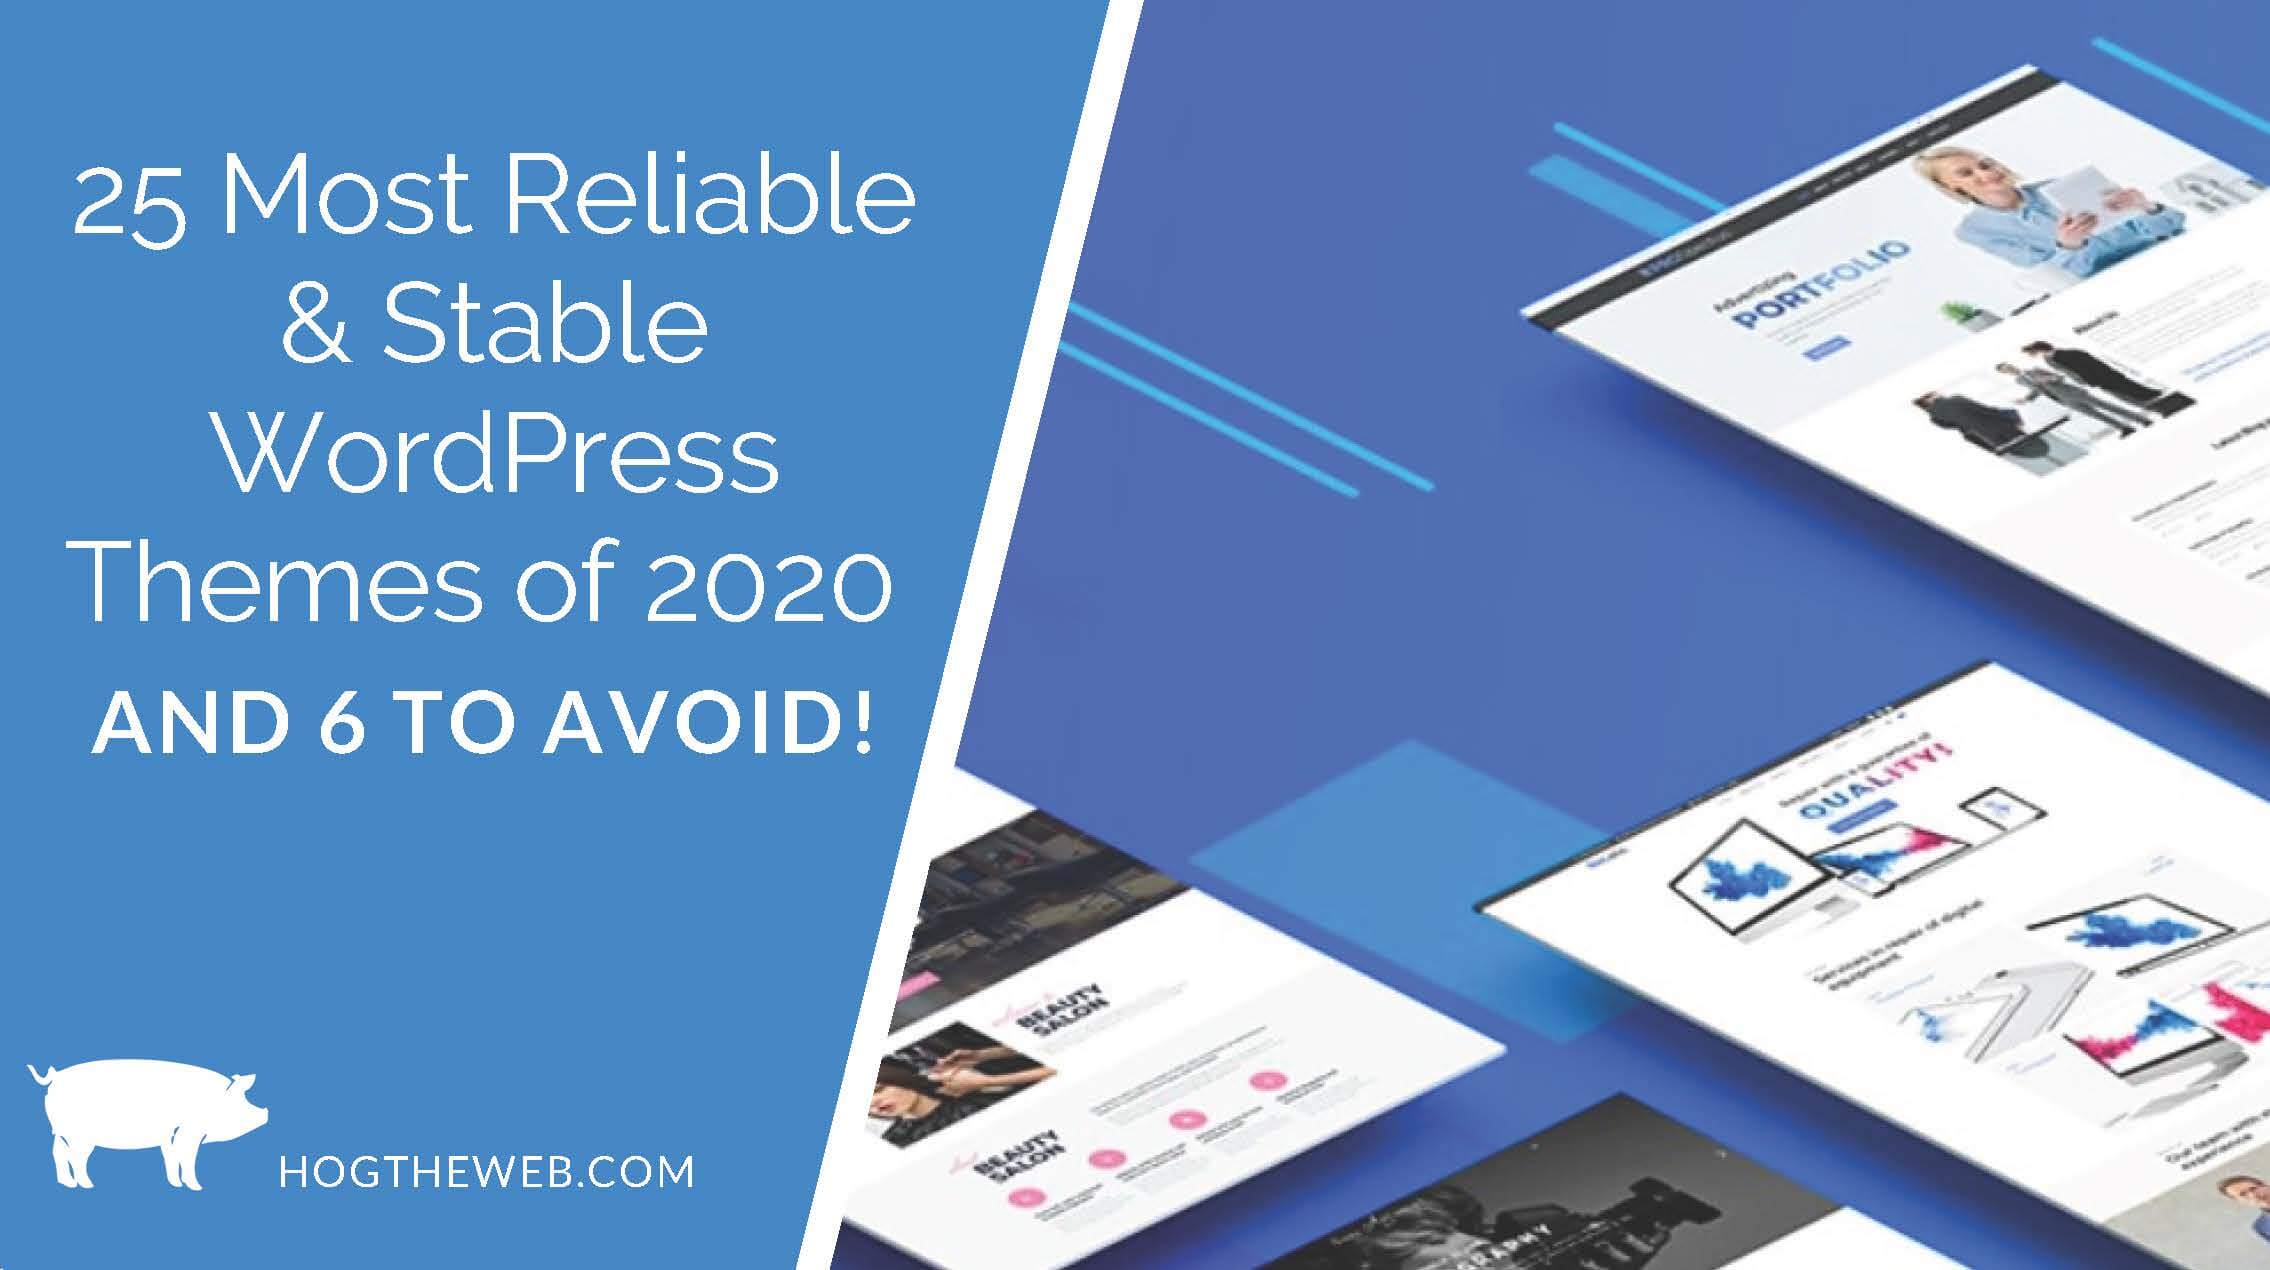 25 Most Stable & Reliable WordPress Themes of 2020(and 6 to Avoid!)